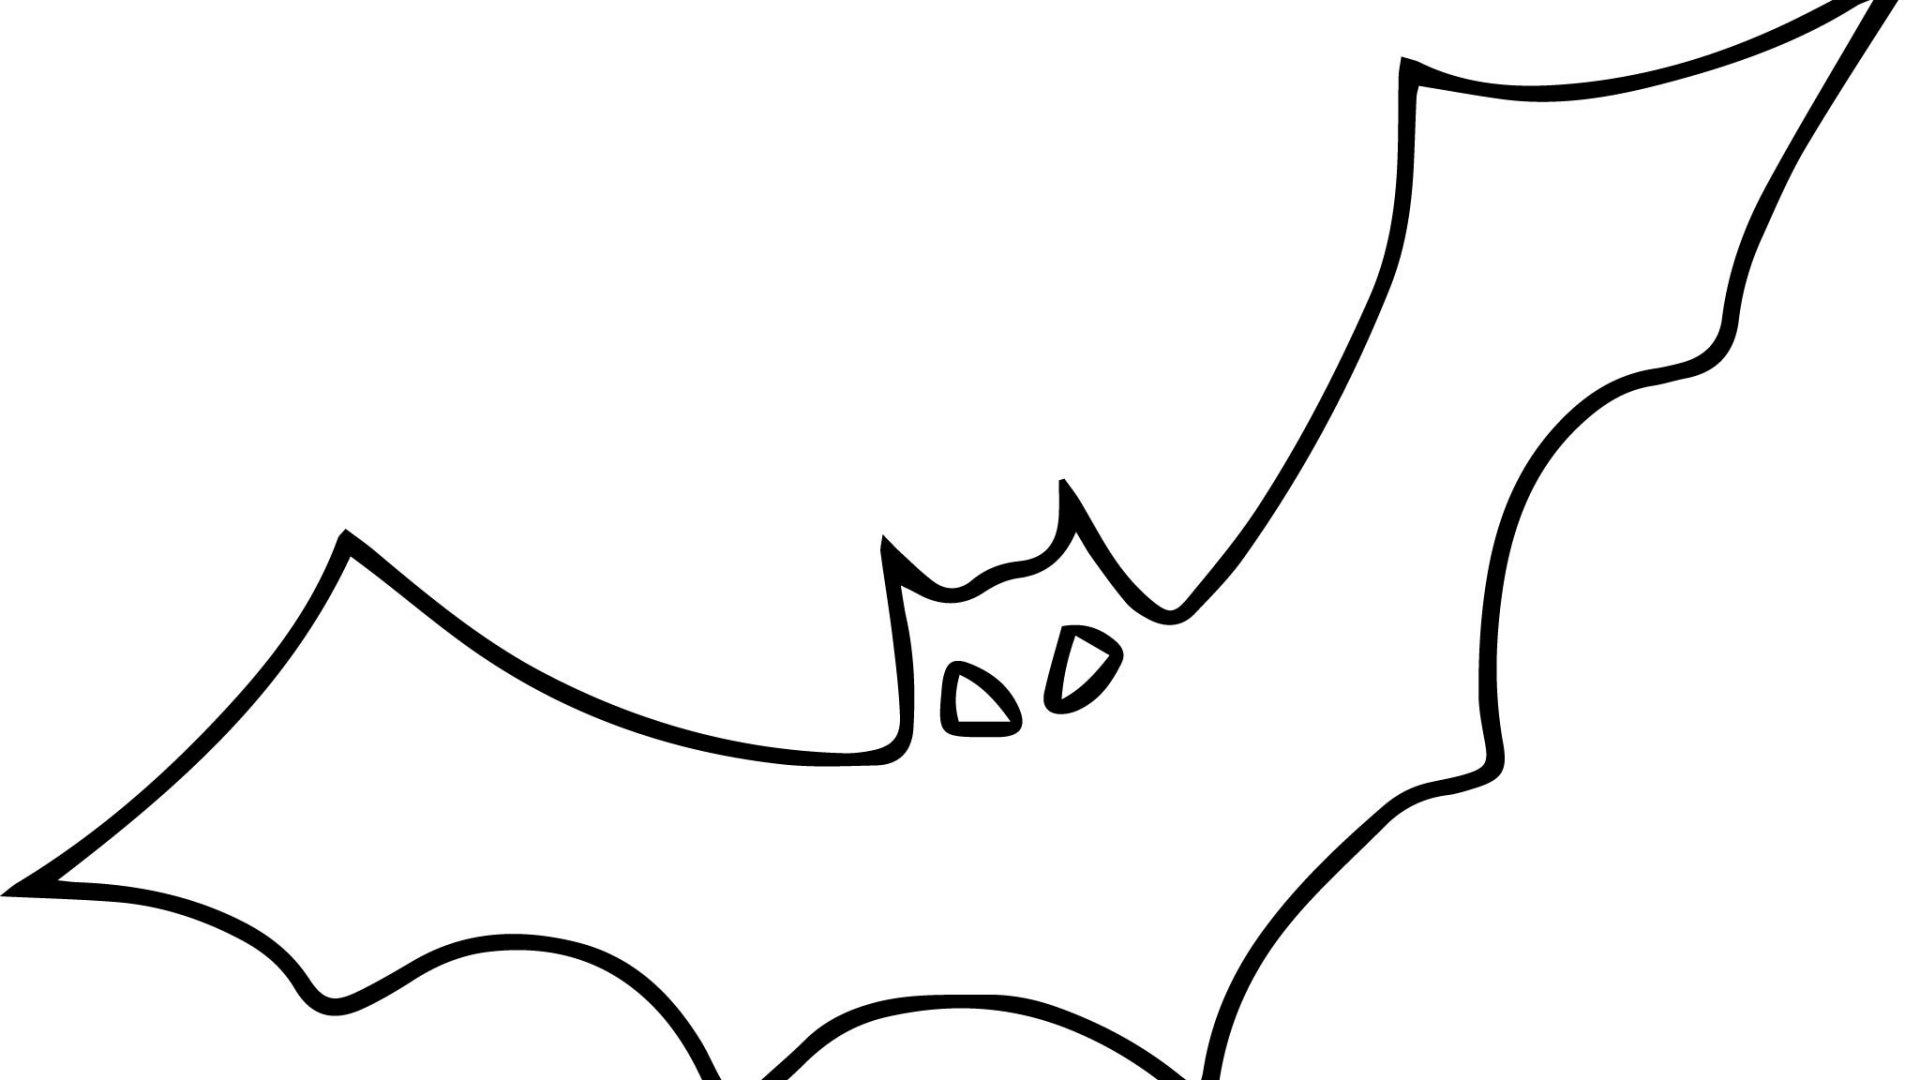 Bat coloring page for. Bats clipart easy